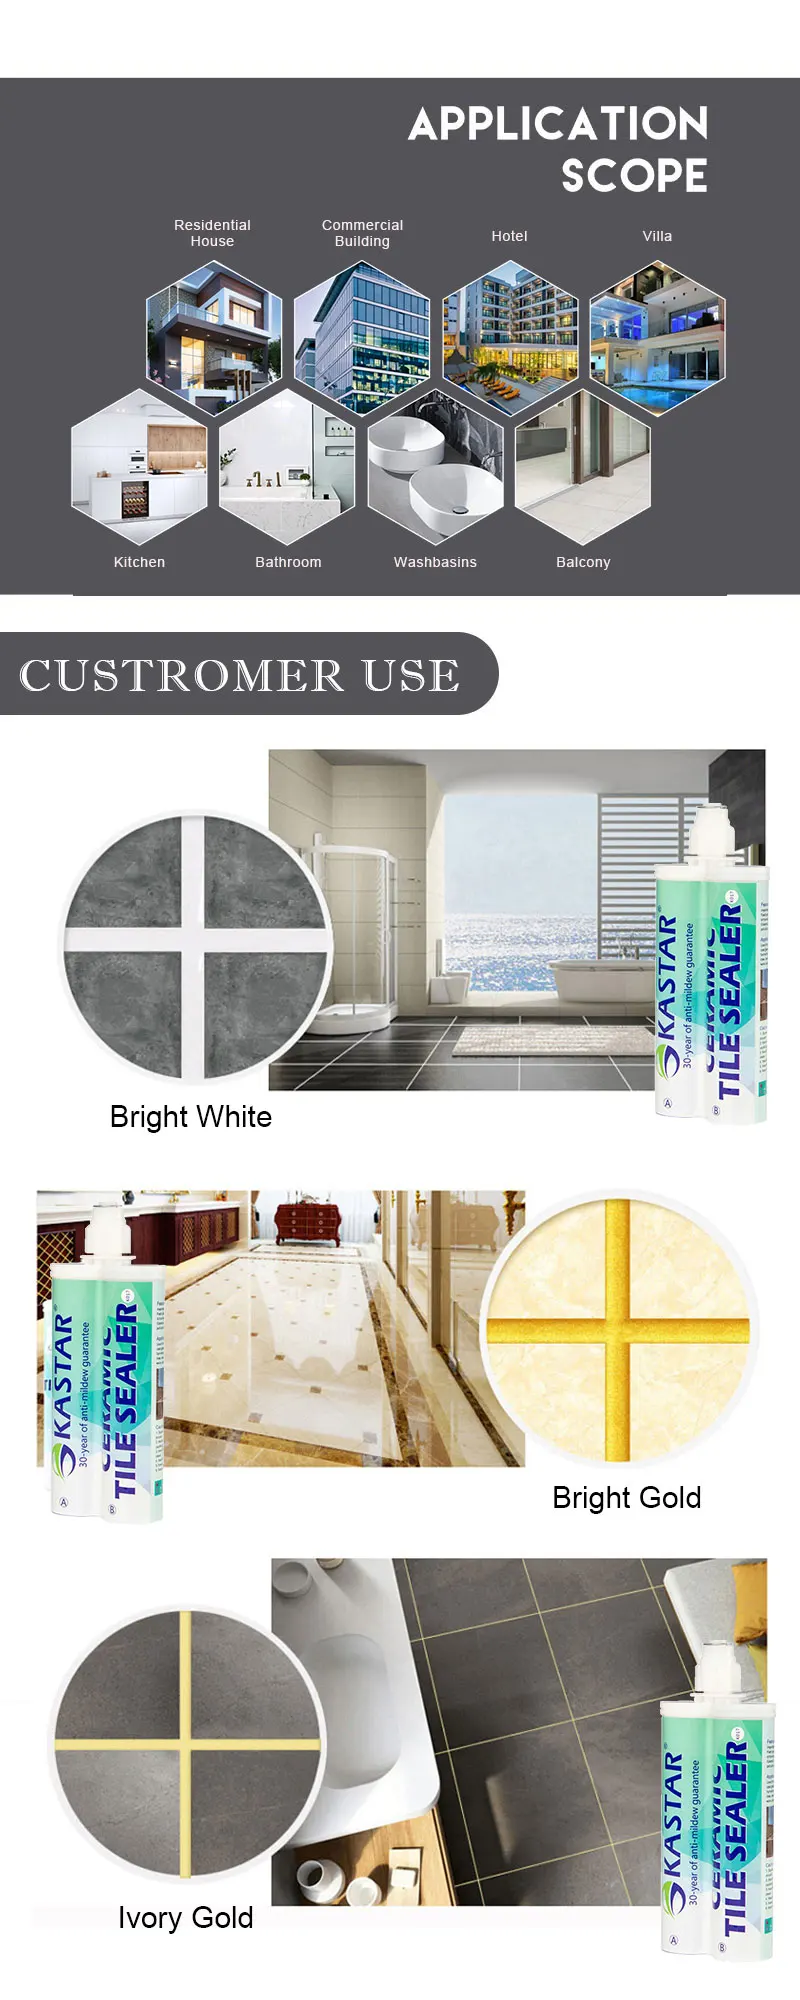 Easy To Operate Two-Part Water Tight Ageing Resistance Lechada Grout For Interior Decoration